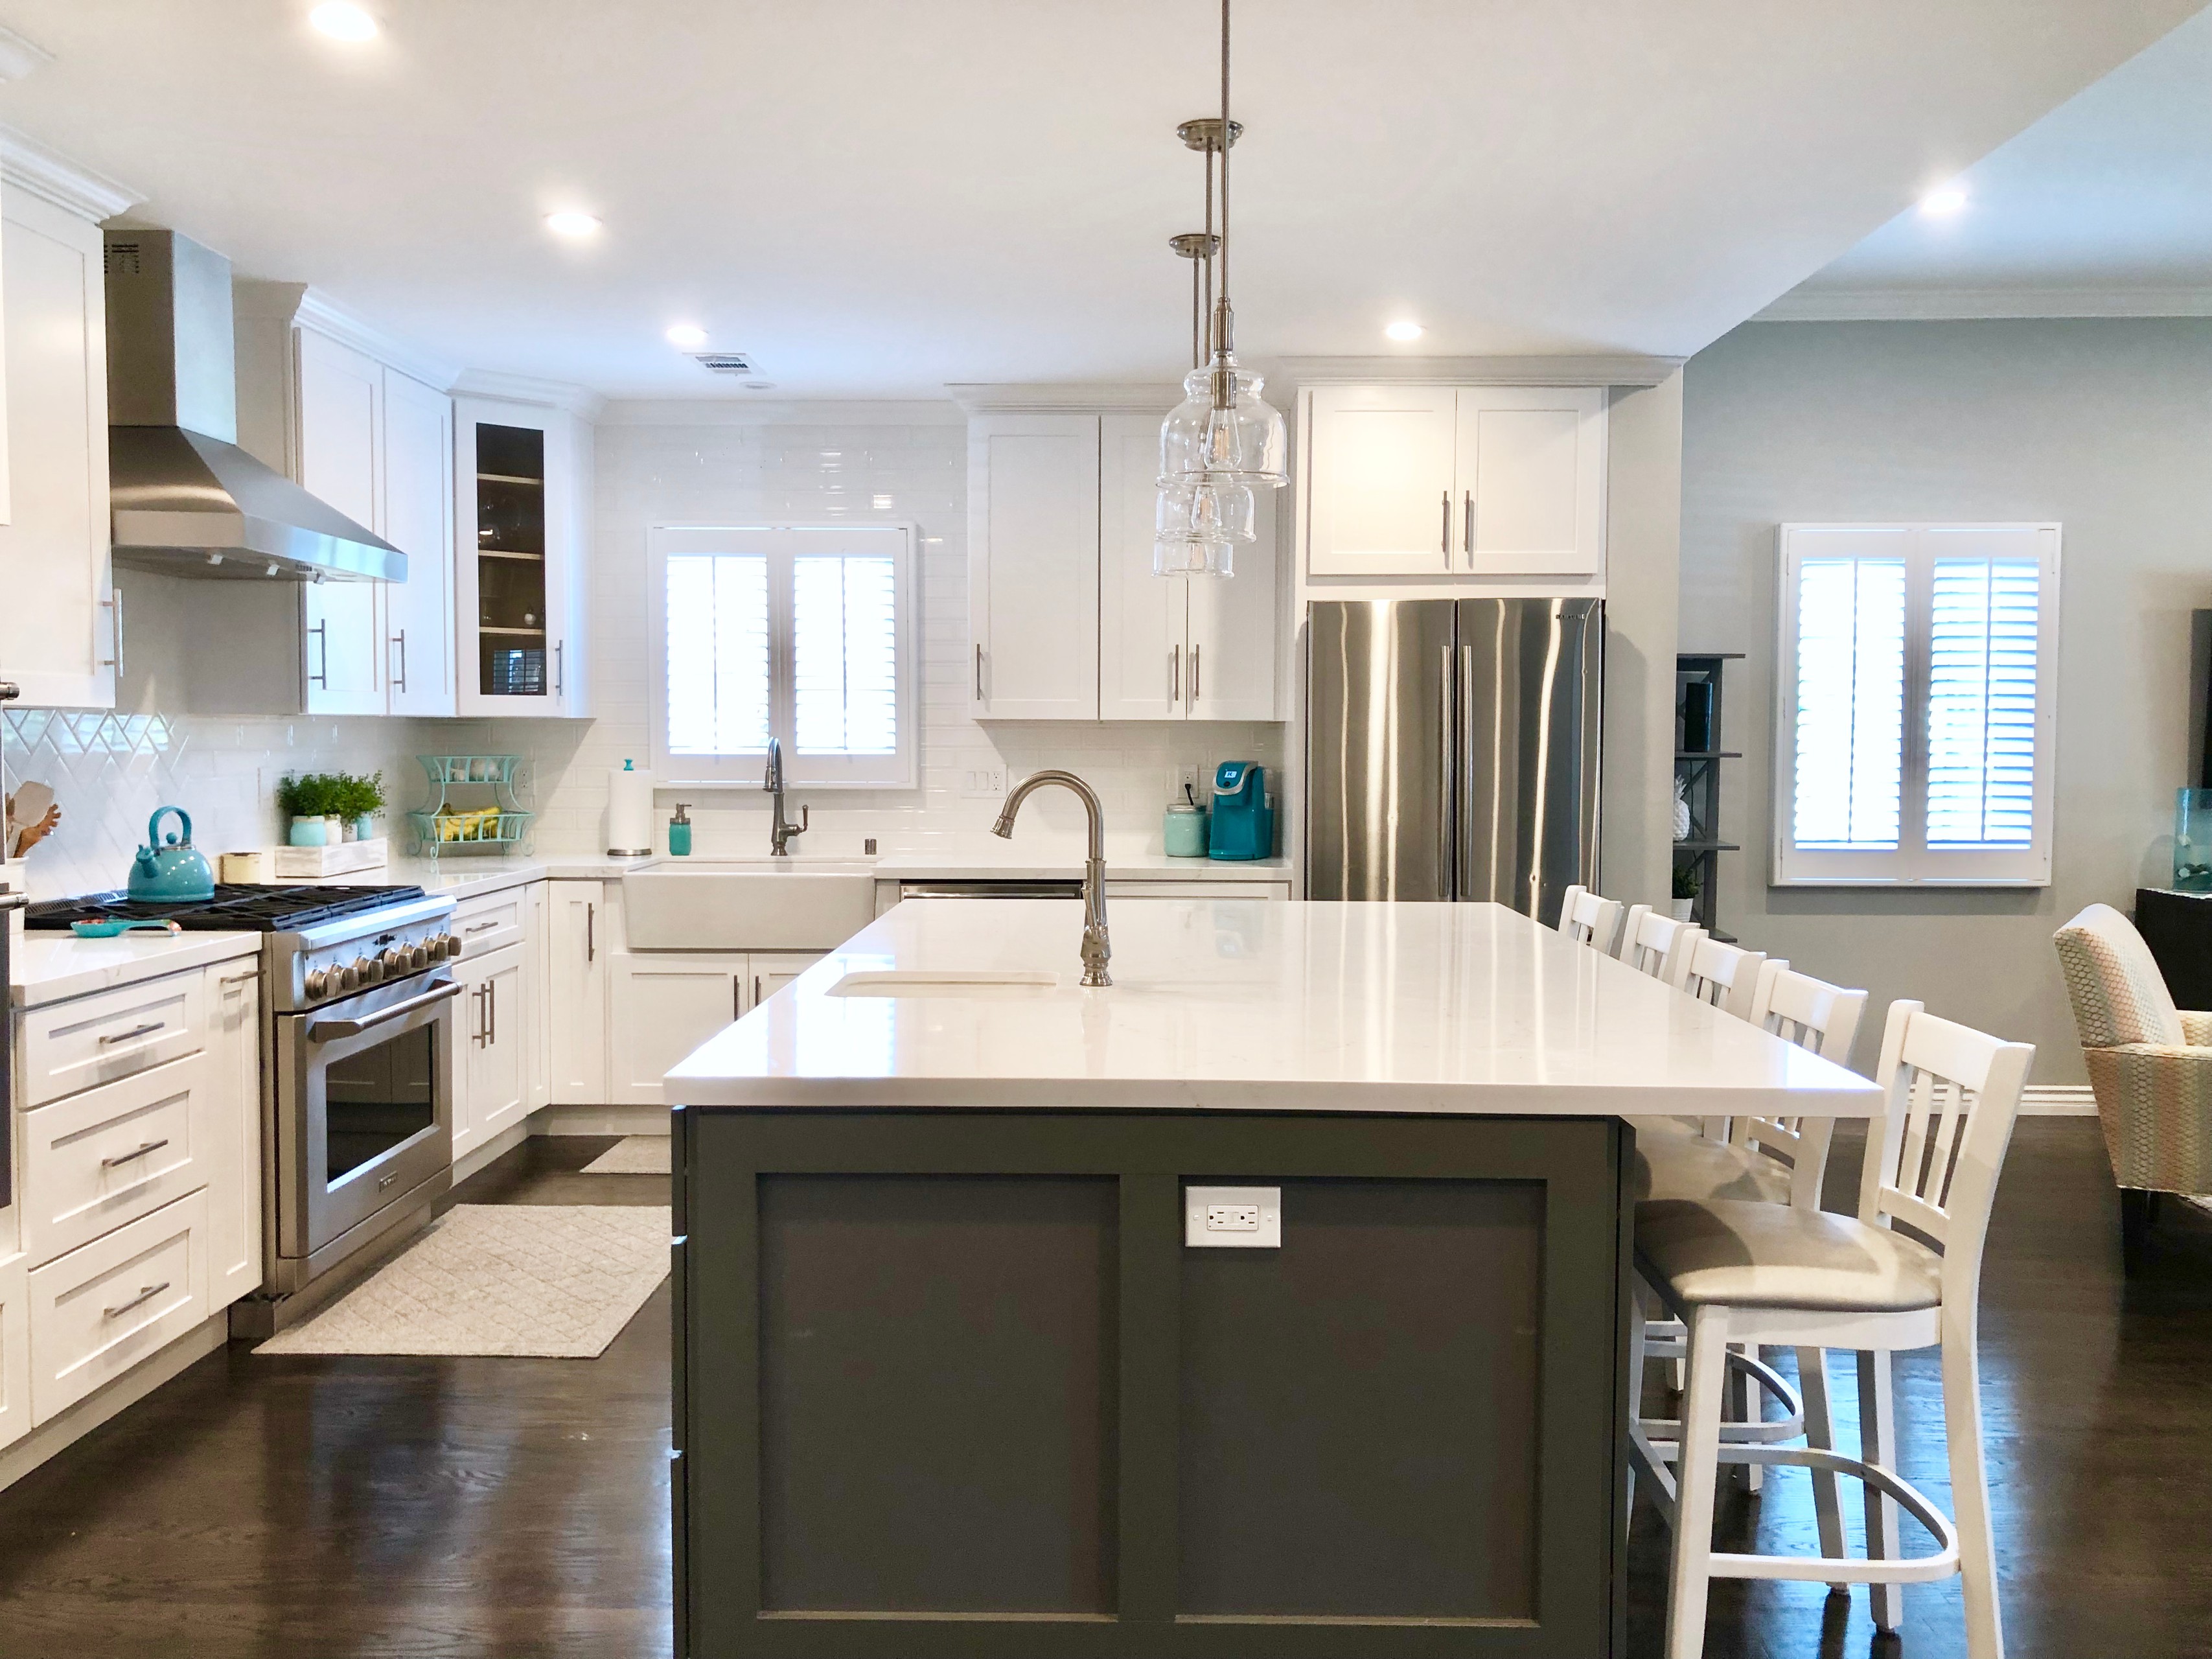 Complete Kitchen Remodel and Living Room Addition to an Existing Home; Installat